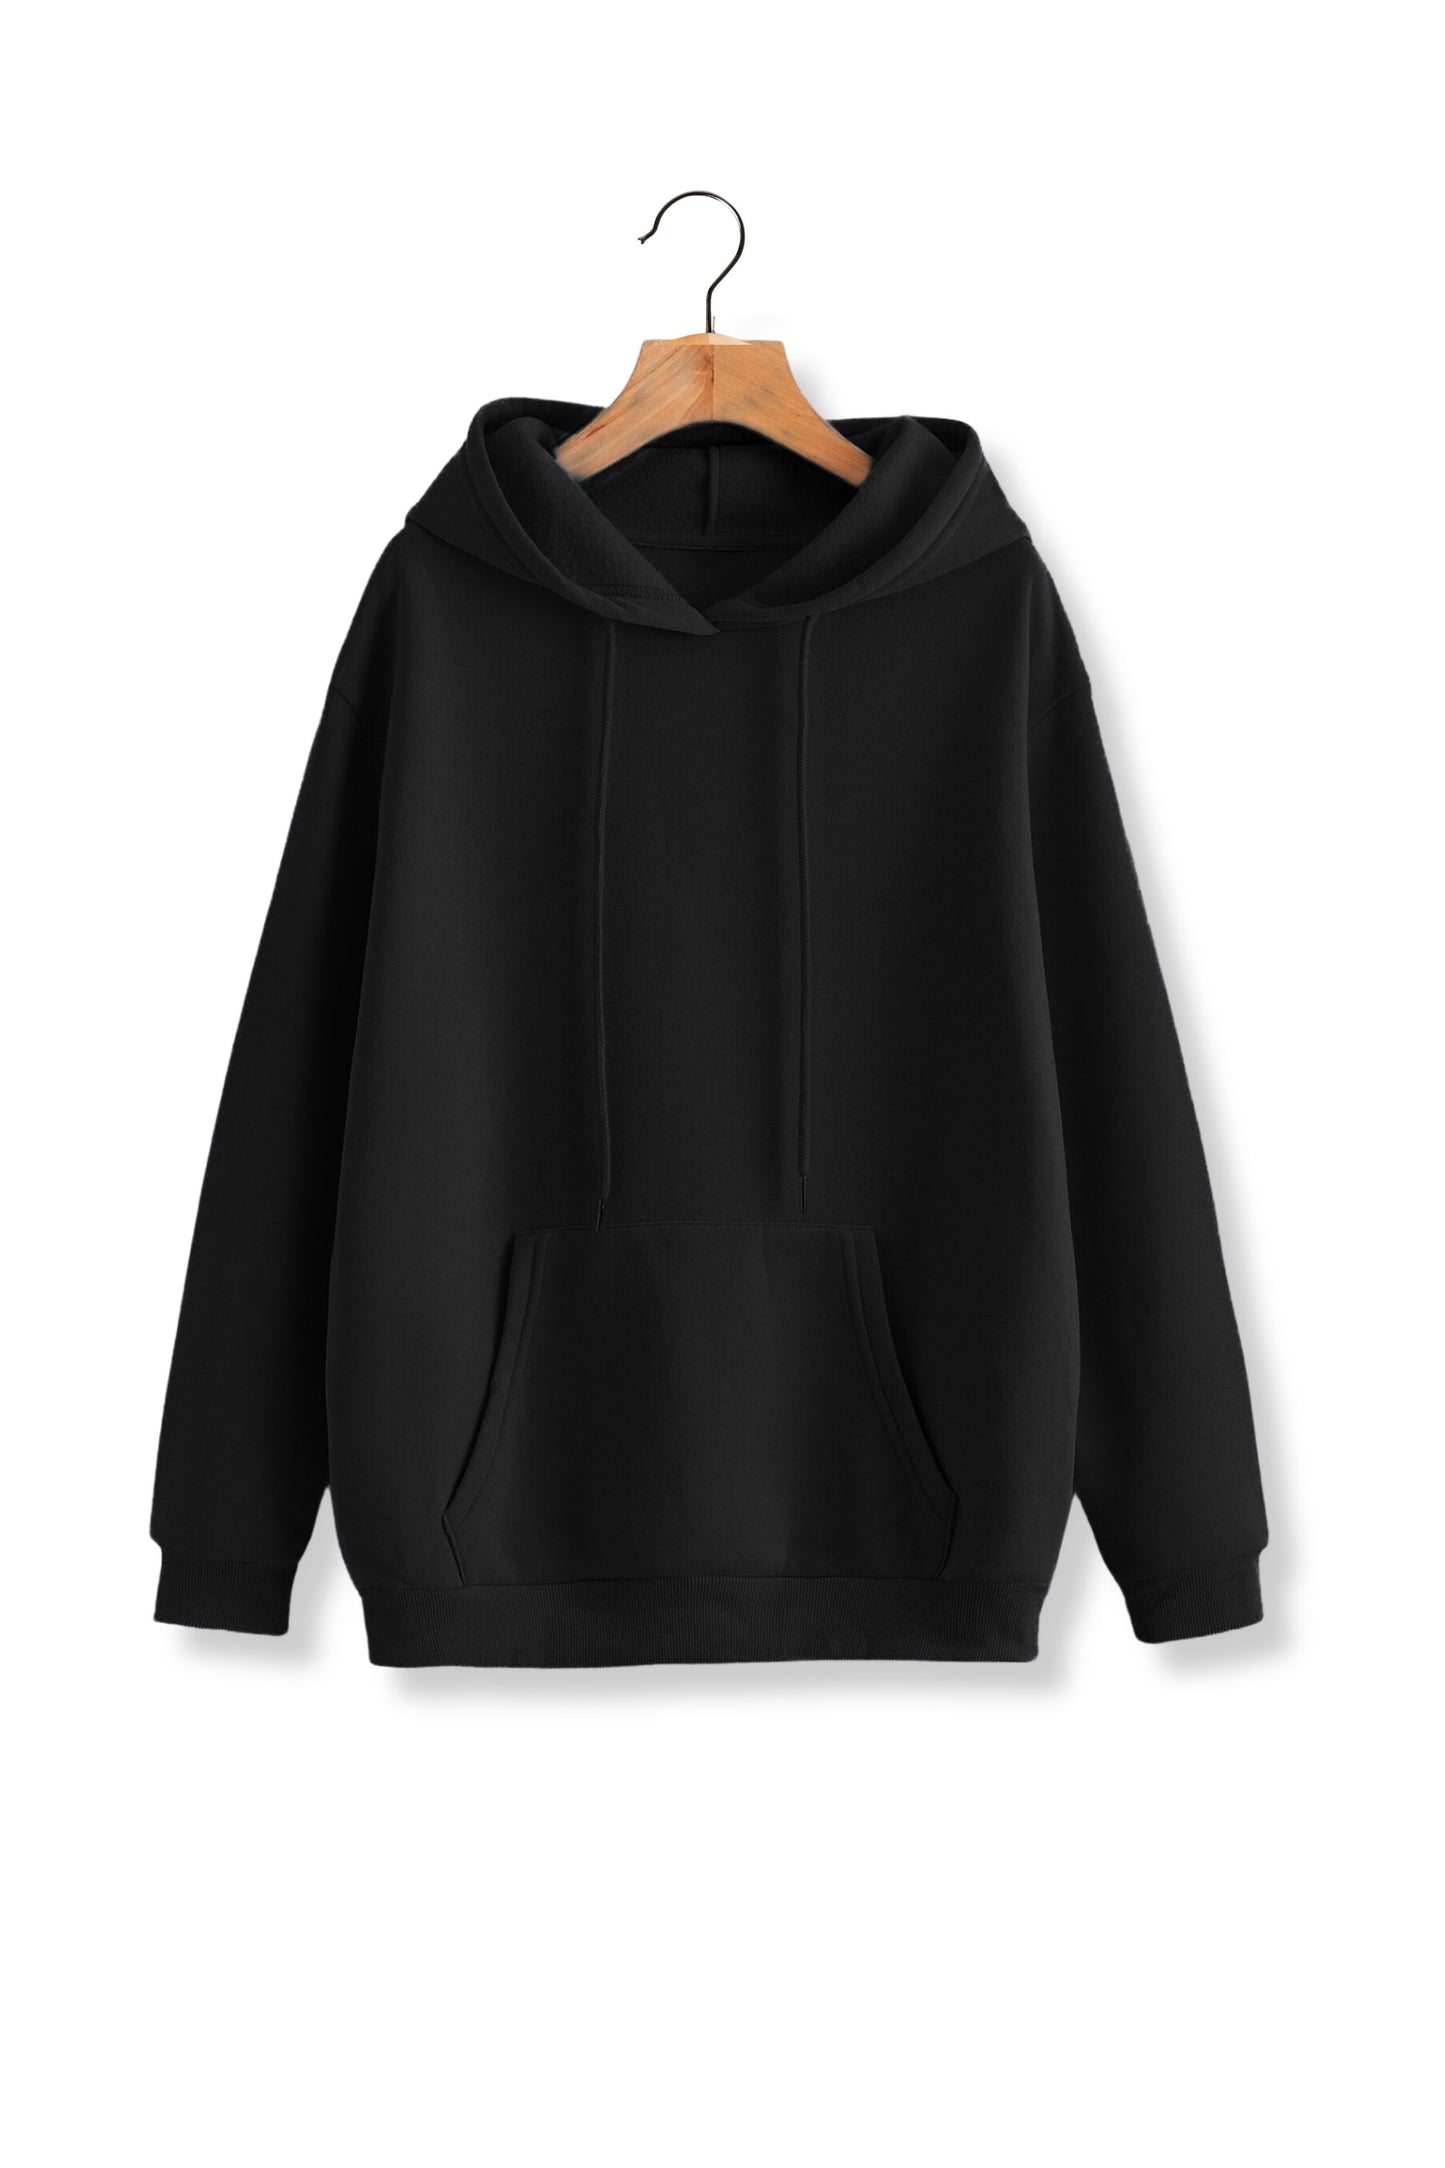 Unisex French Terry Hoodies - Black